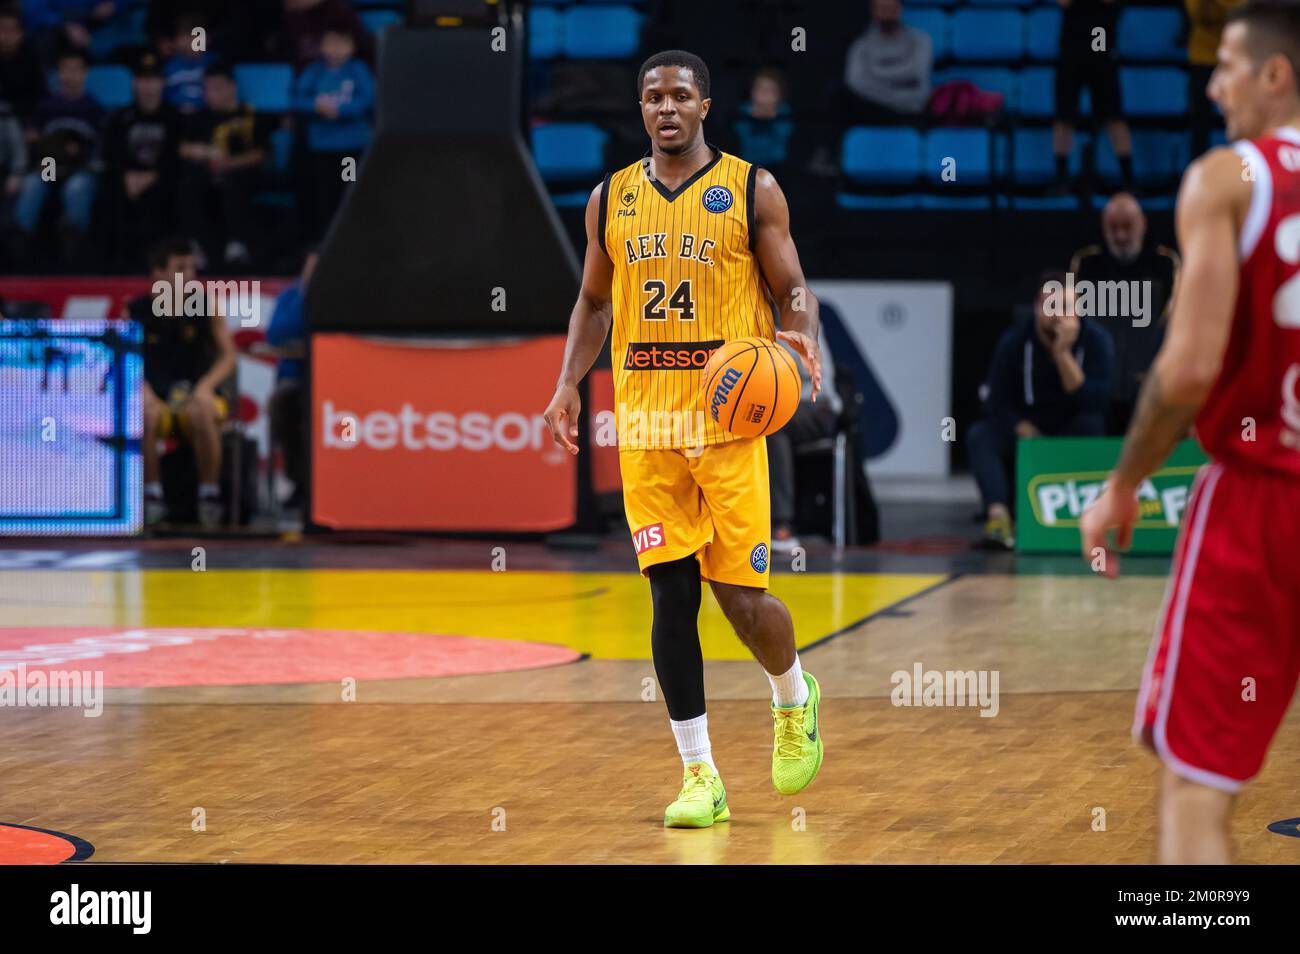 Athens, Lombardy, Greece. 7th Dec, 2022. 24 WILLIAMS KENNY.of AEK Athens BC  during the Basketball Champions League, Gameday 5, match between AEK Athens  BC and UNAHOTELS Reggio Emilia at Ano Liossia Olympic